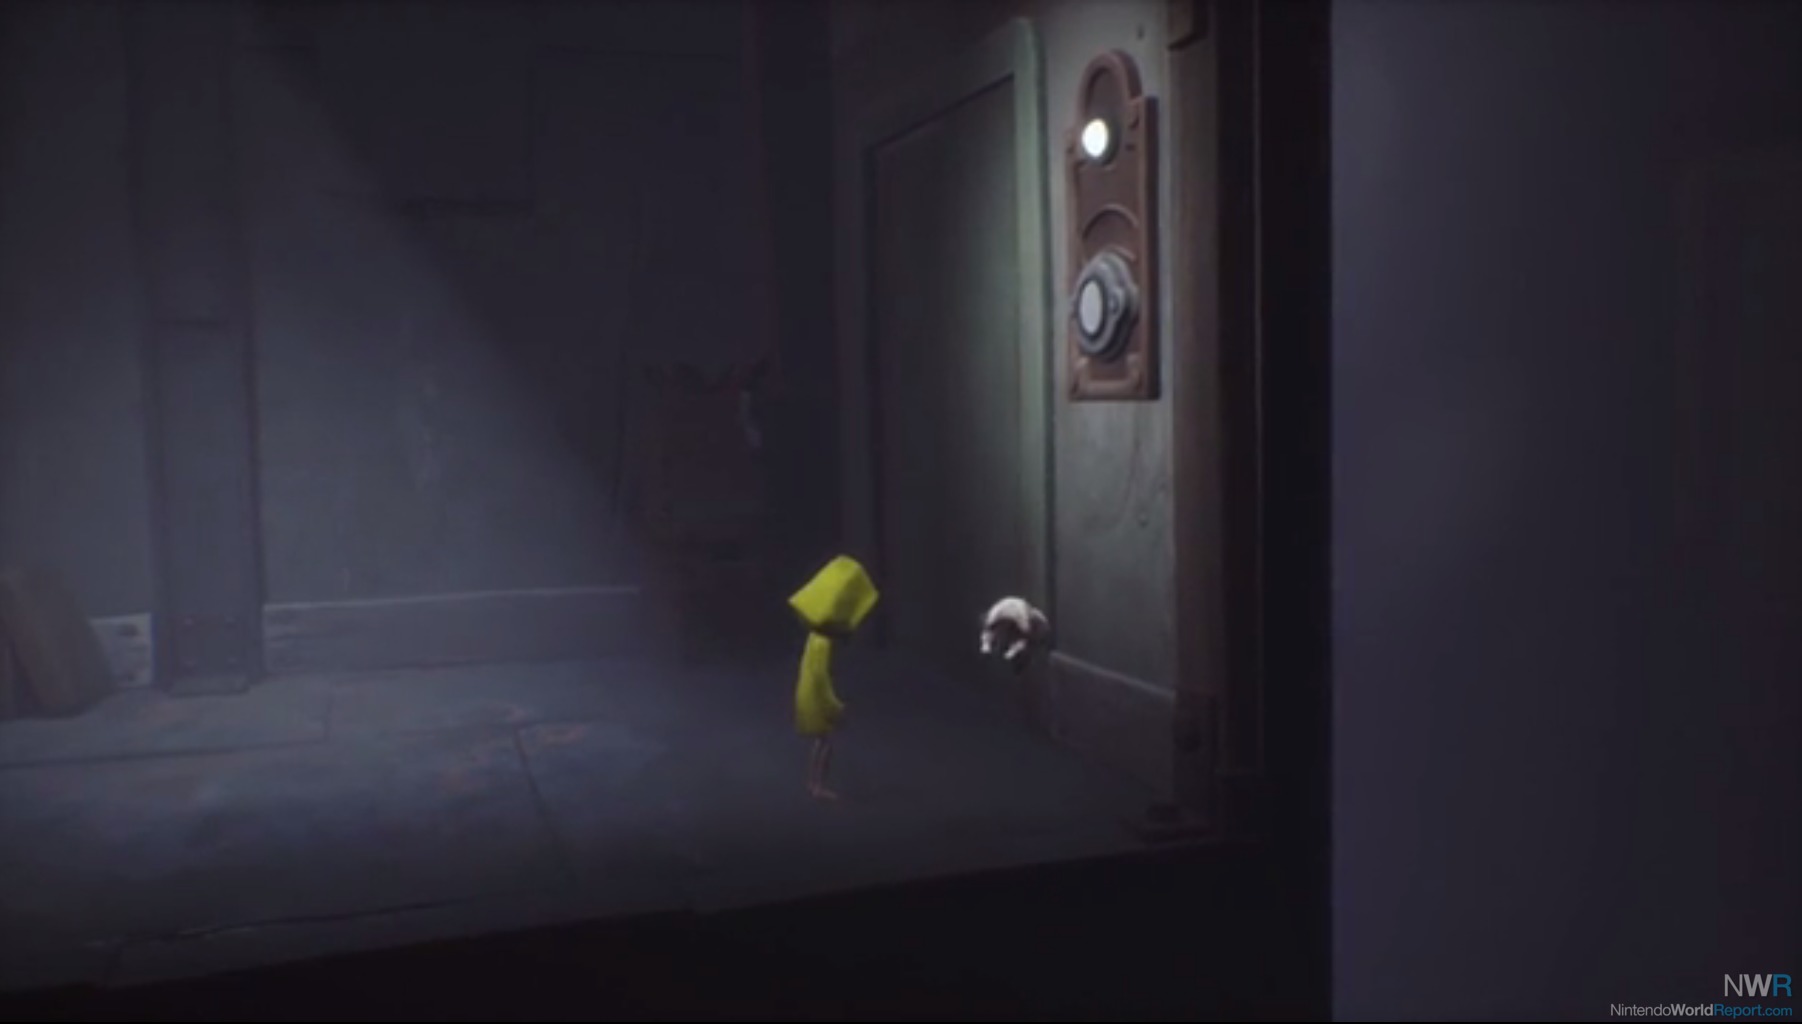 Little Nightmares is coming to Nintendo Switch with this